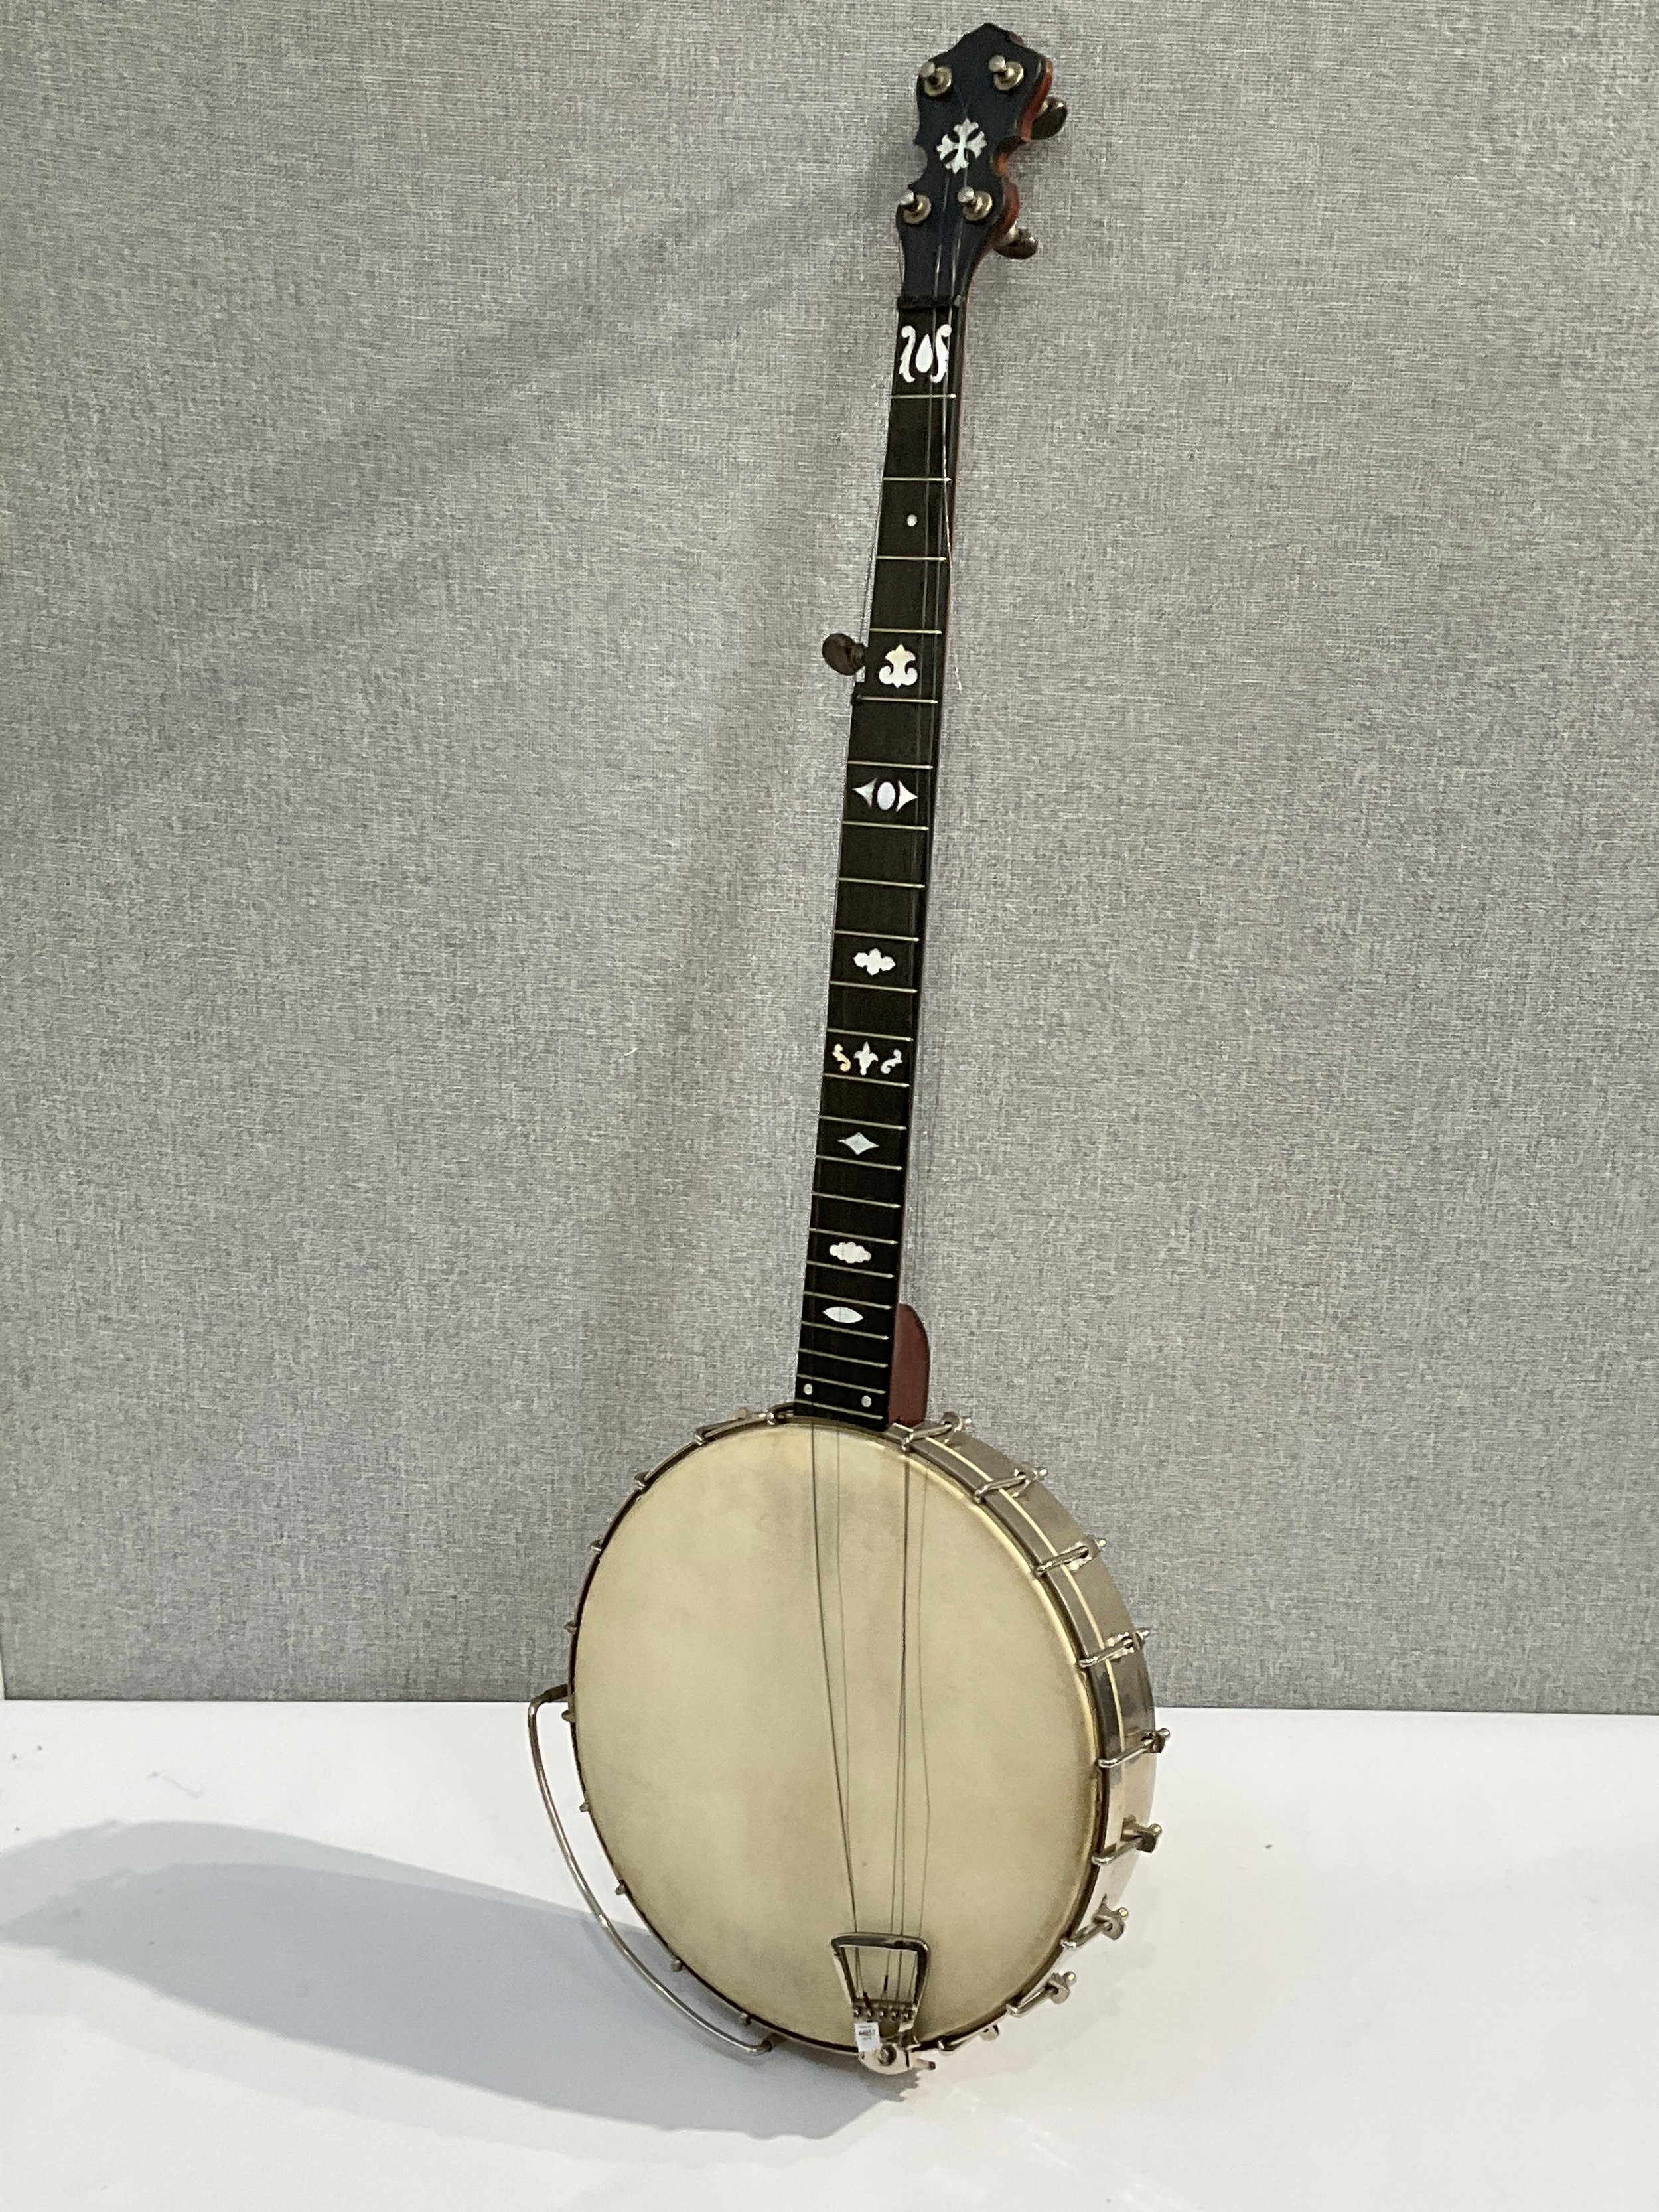 A Clifford Essex Co. Of Bond Street, London banjo circa 1910-20, open back with mother of pearl